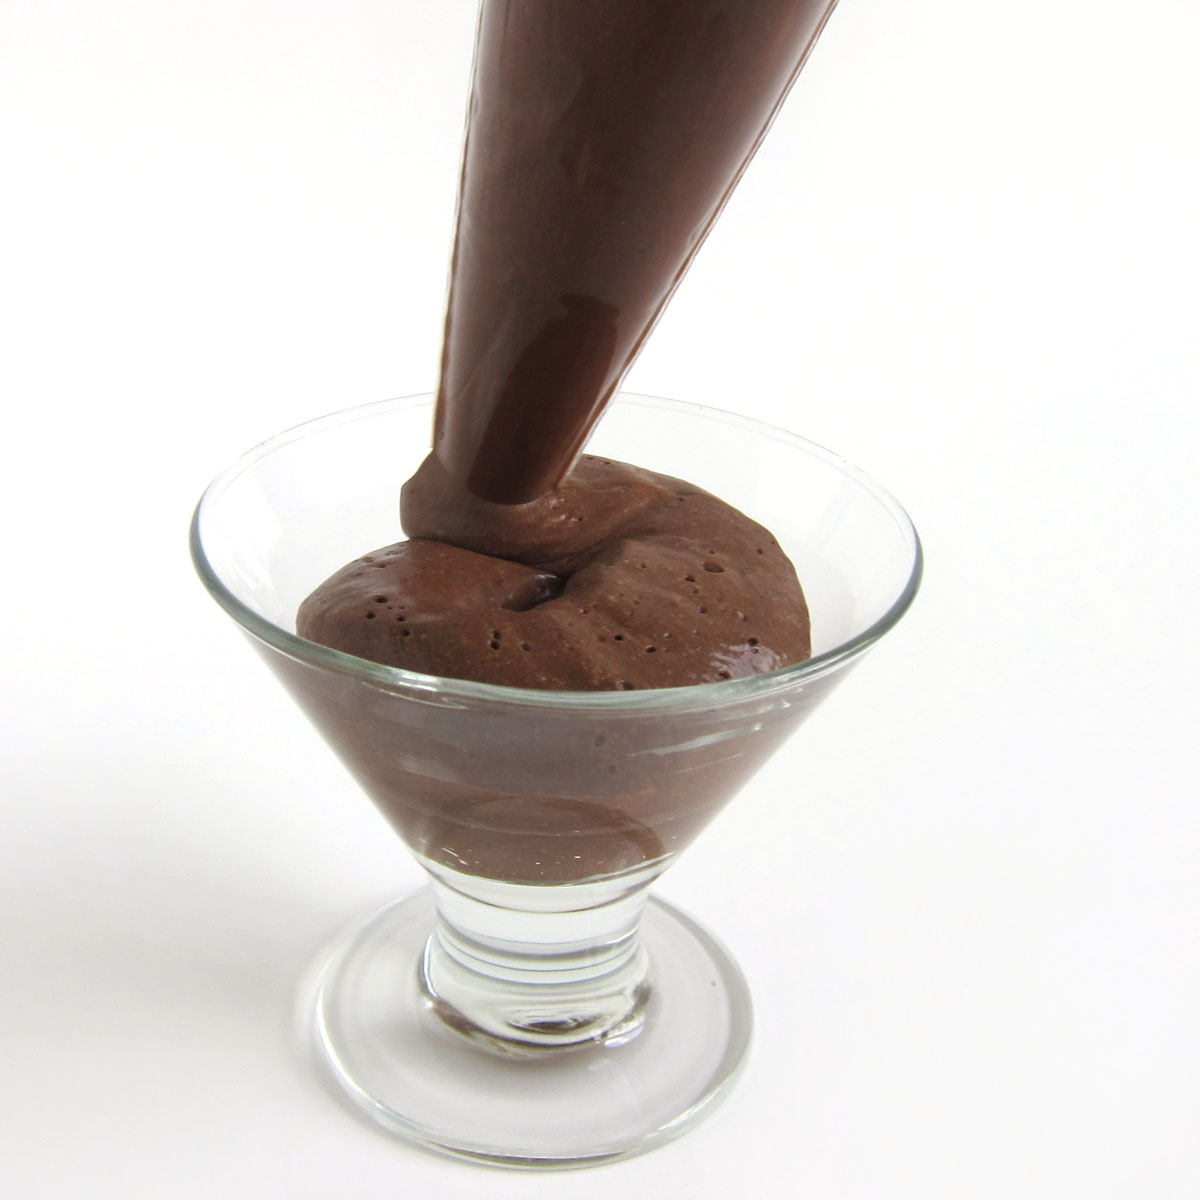 piping dark chocolate mousse into a small glass dessert cup